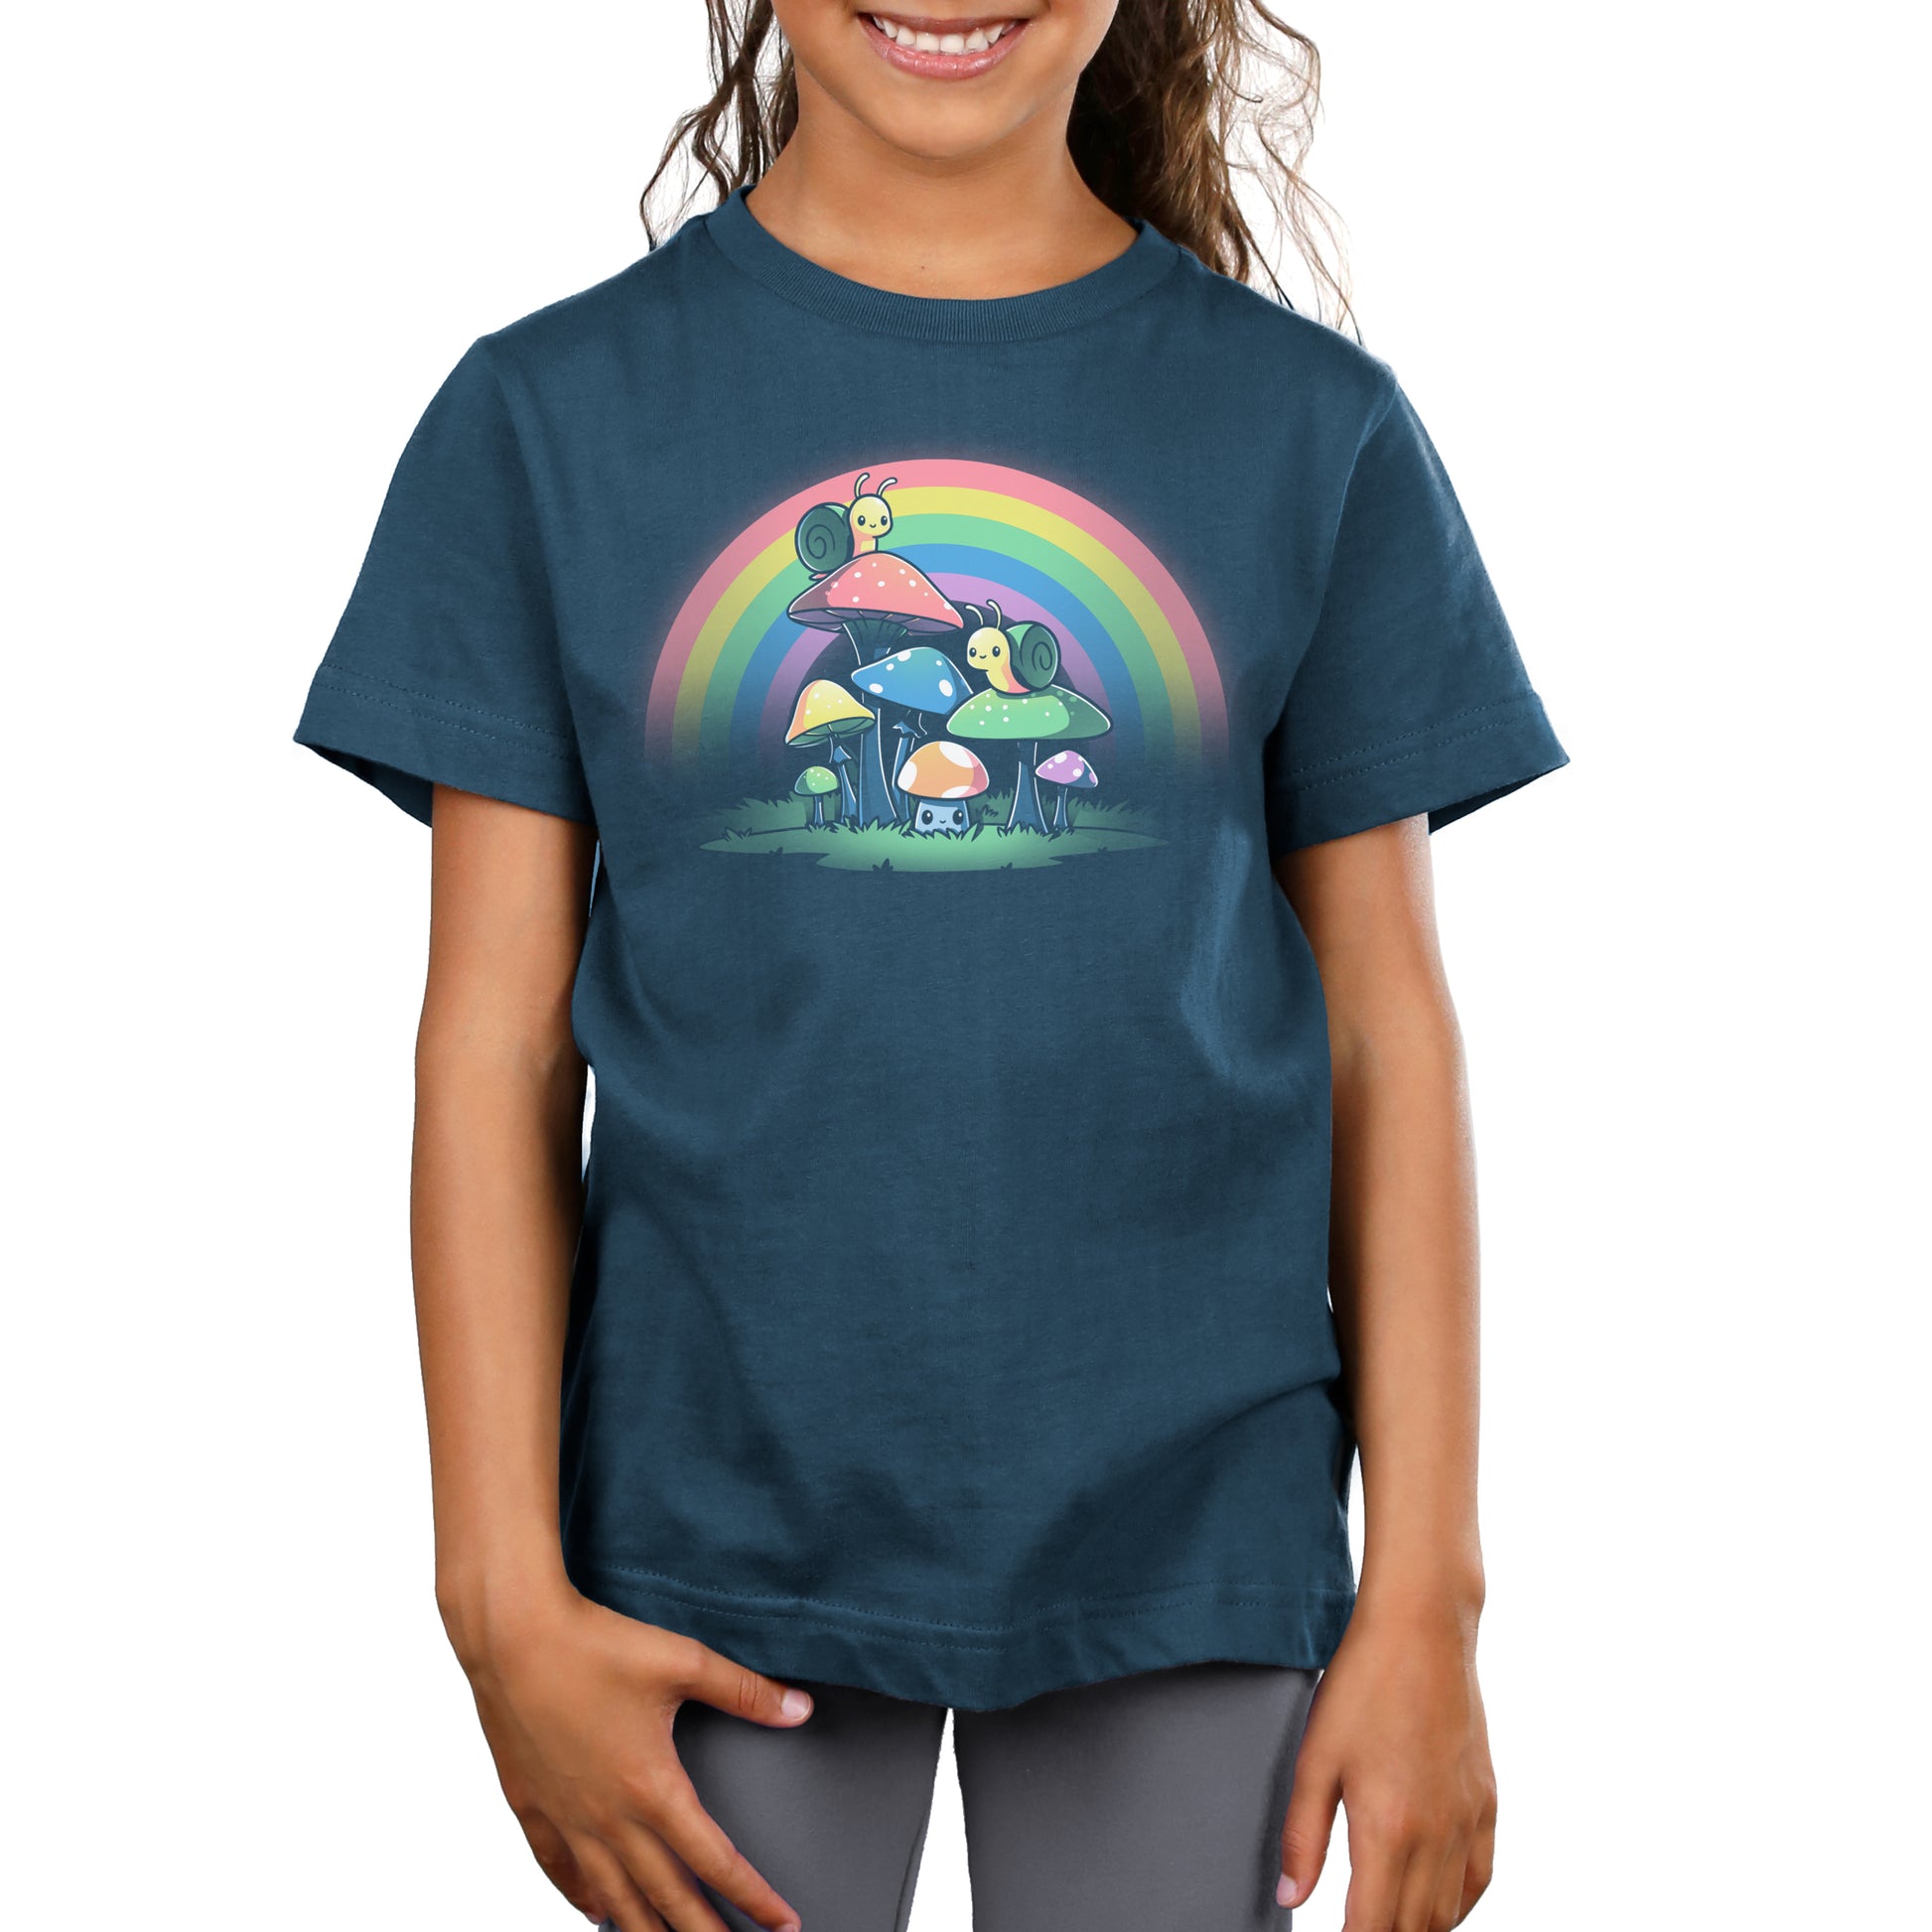 A girl wearing a blue t-shirt with a rainbow on it, featuring TeeTurtle's Snails and Mushrooms design.